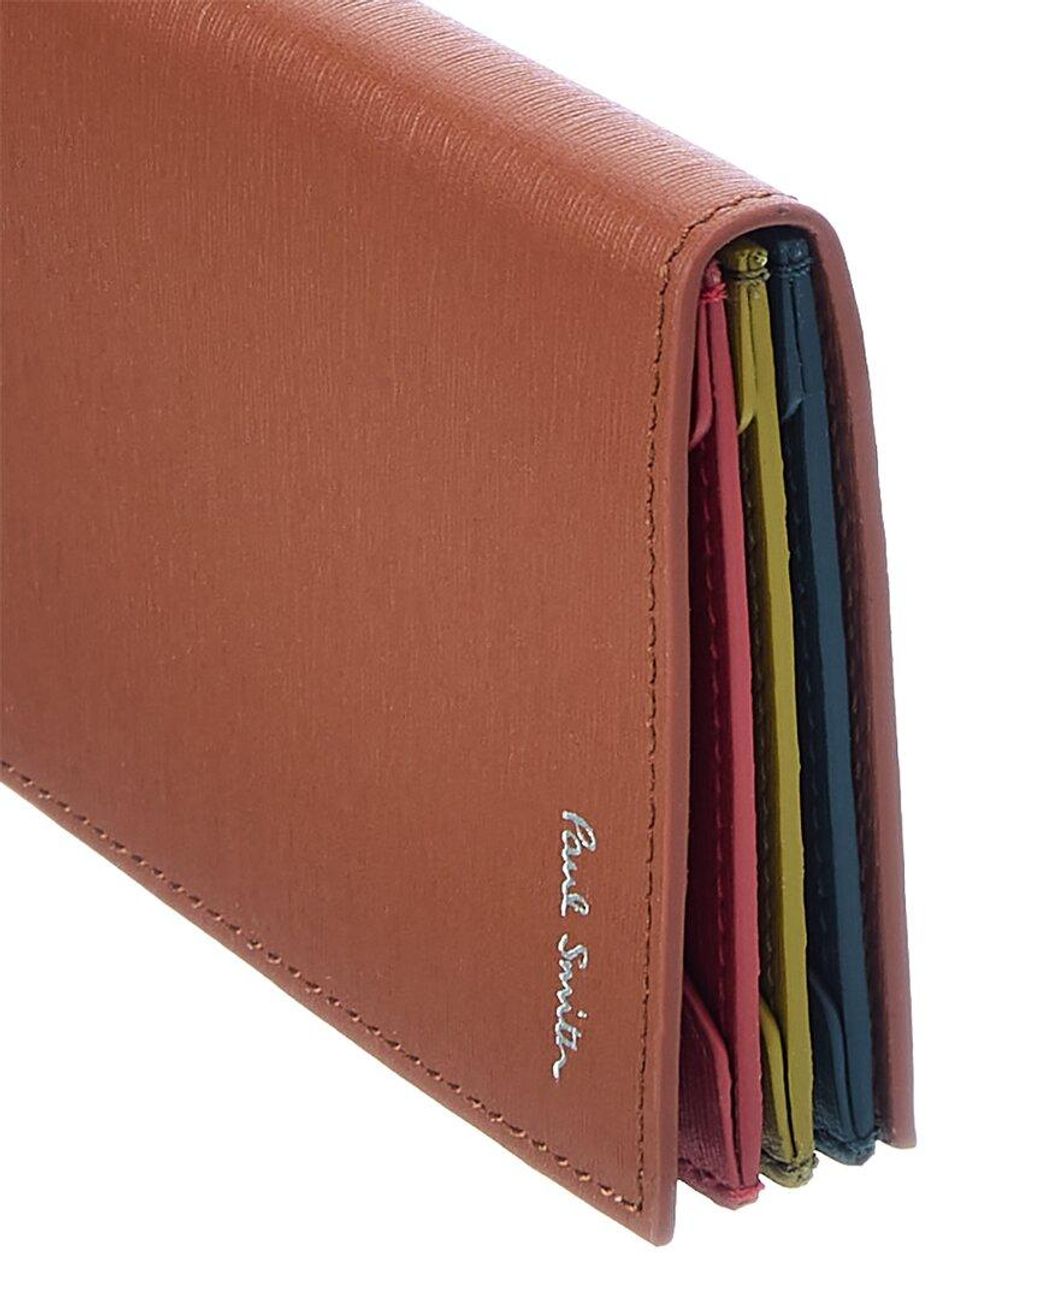 Paul Smith Wallet Leather Card Holder in Orange for Men | Lyst